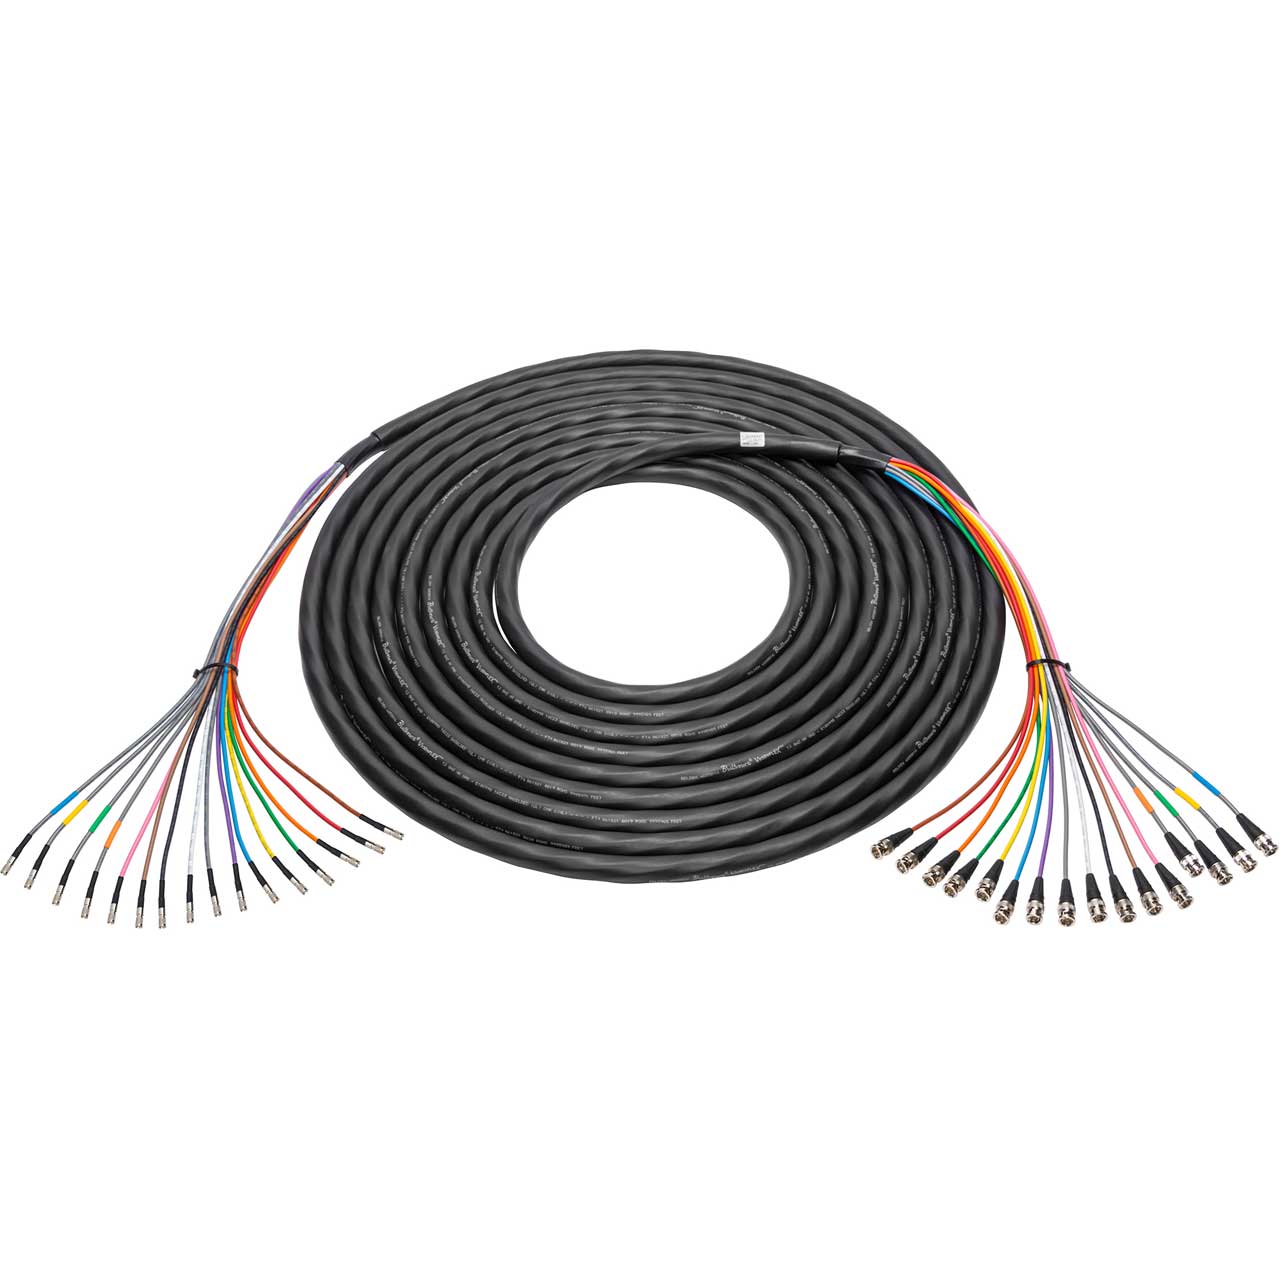 Laird 4855R16-D-B-006 16-Channel 12G-SDI / 4K UHD DIN 1.0 / 2.3 Male to BNC Male Snake Cable - 6 Foot 4855R16-D-B-006